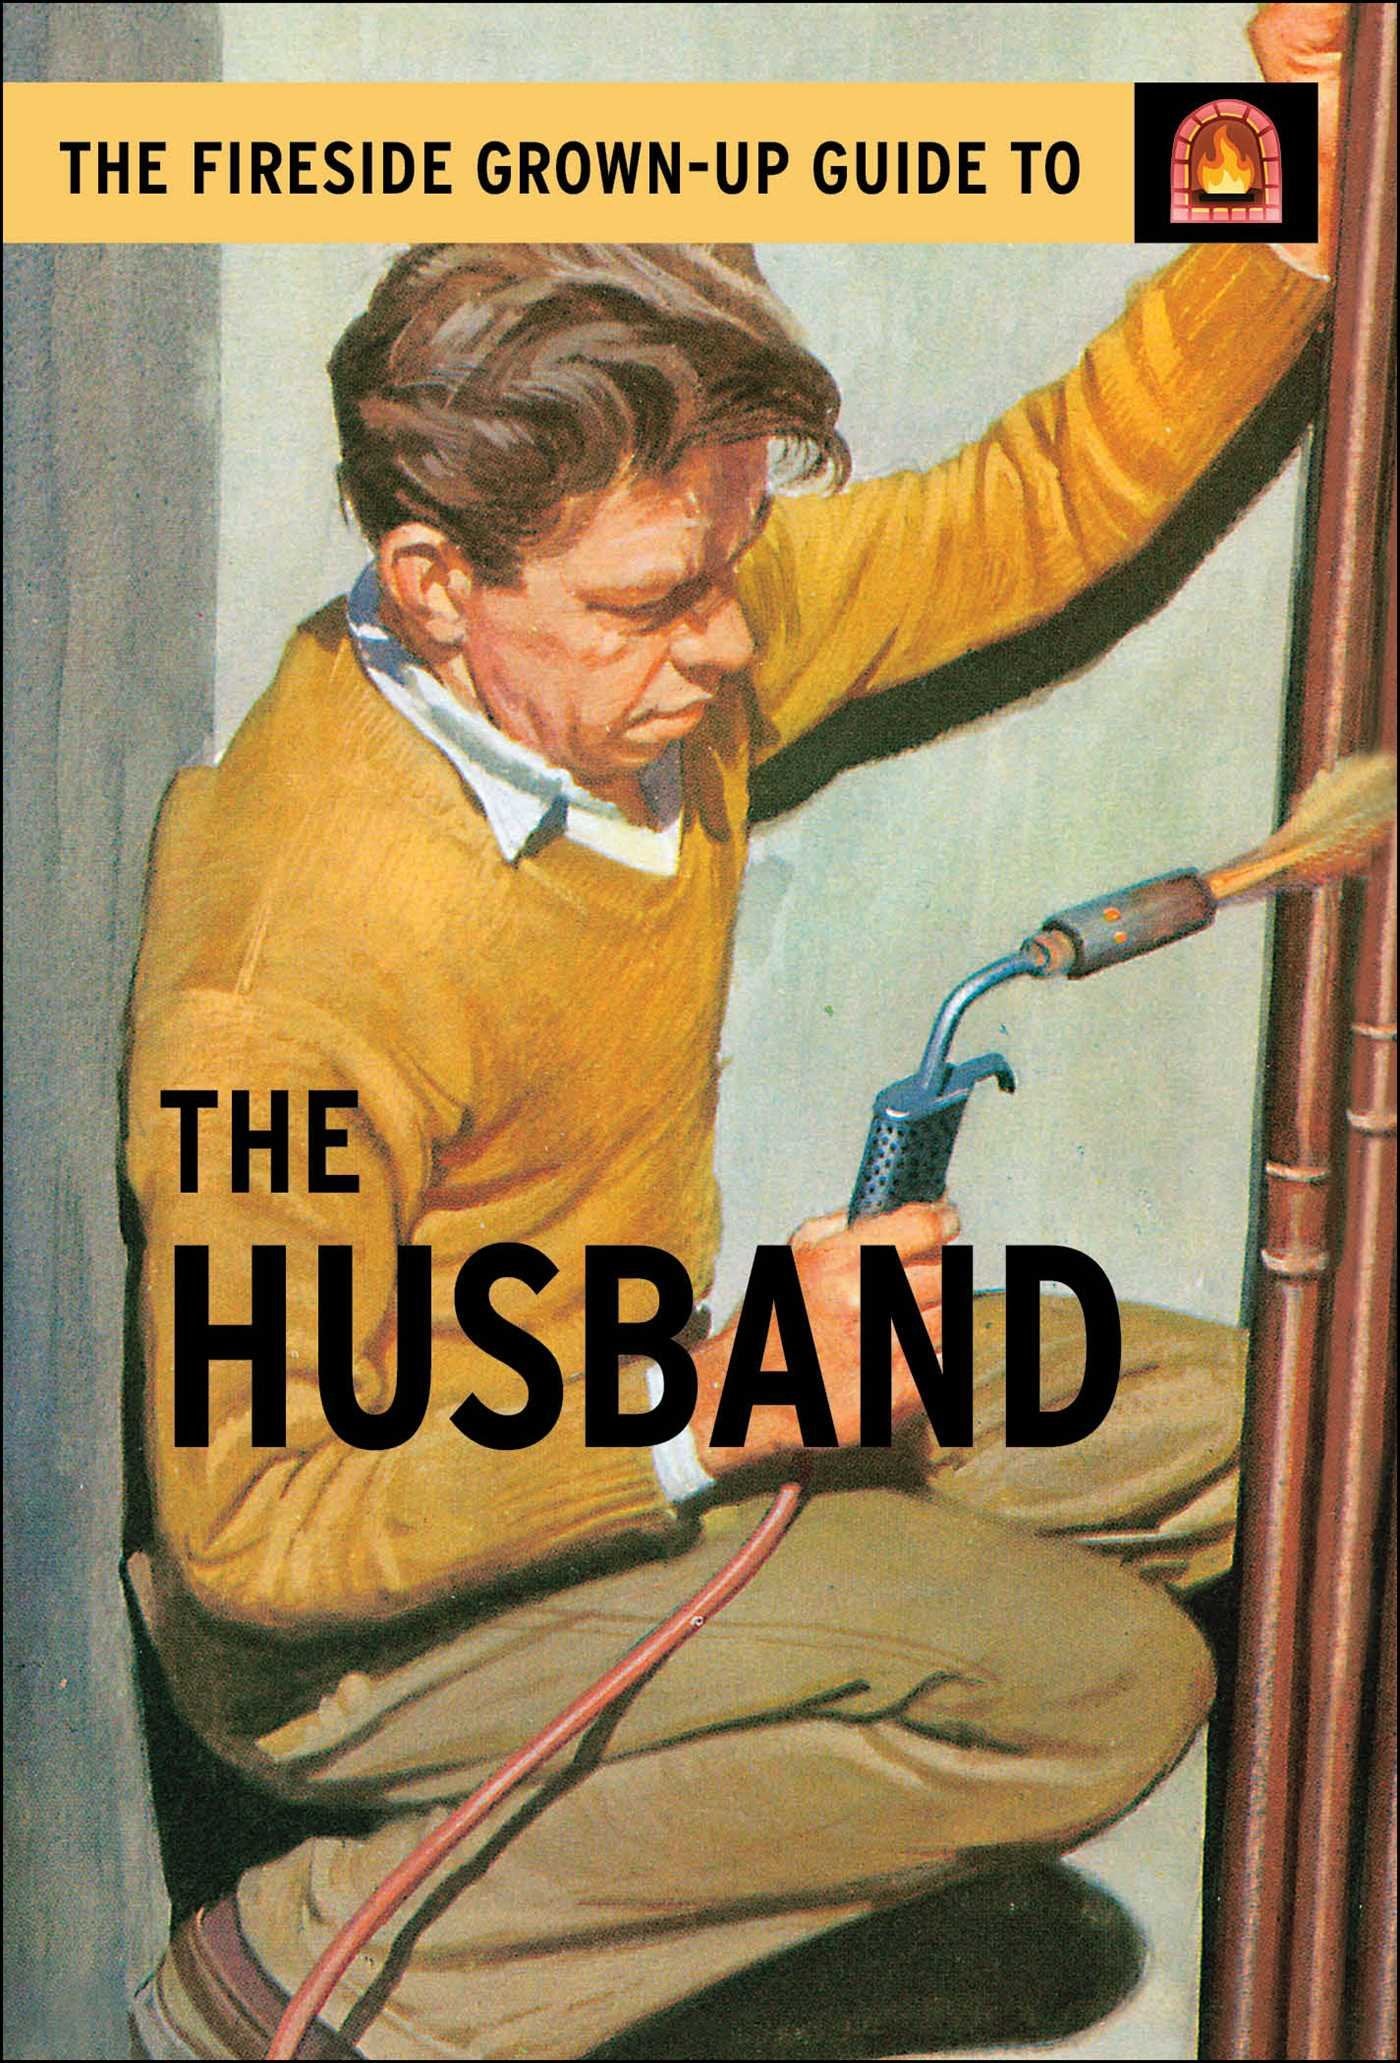 Fireside Grown-Up Guide to the Husband